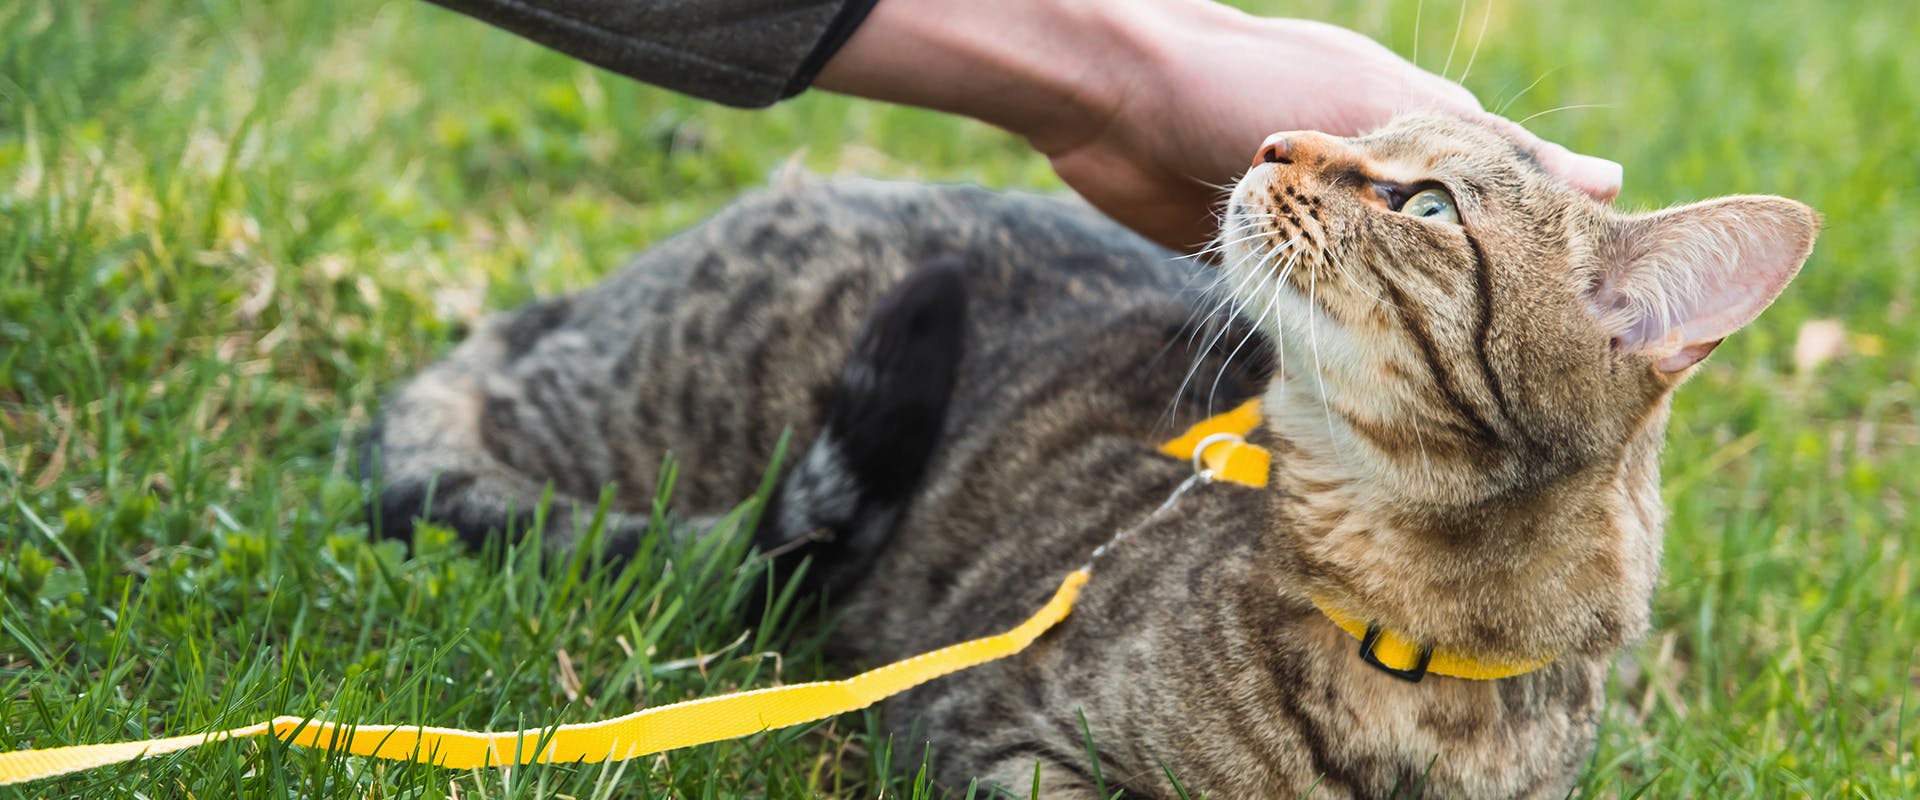 A cat laying in the grass wearing a bright yellow cat harness, looking up at a human who is out of shot